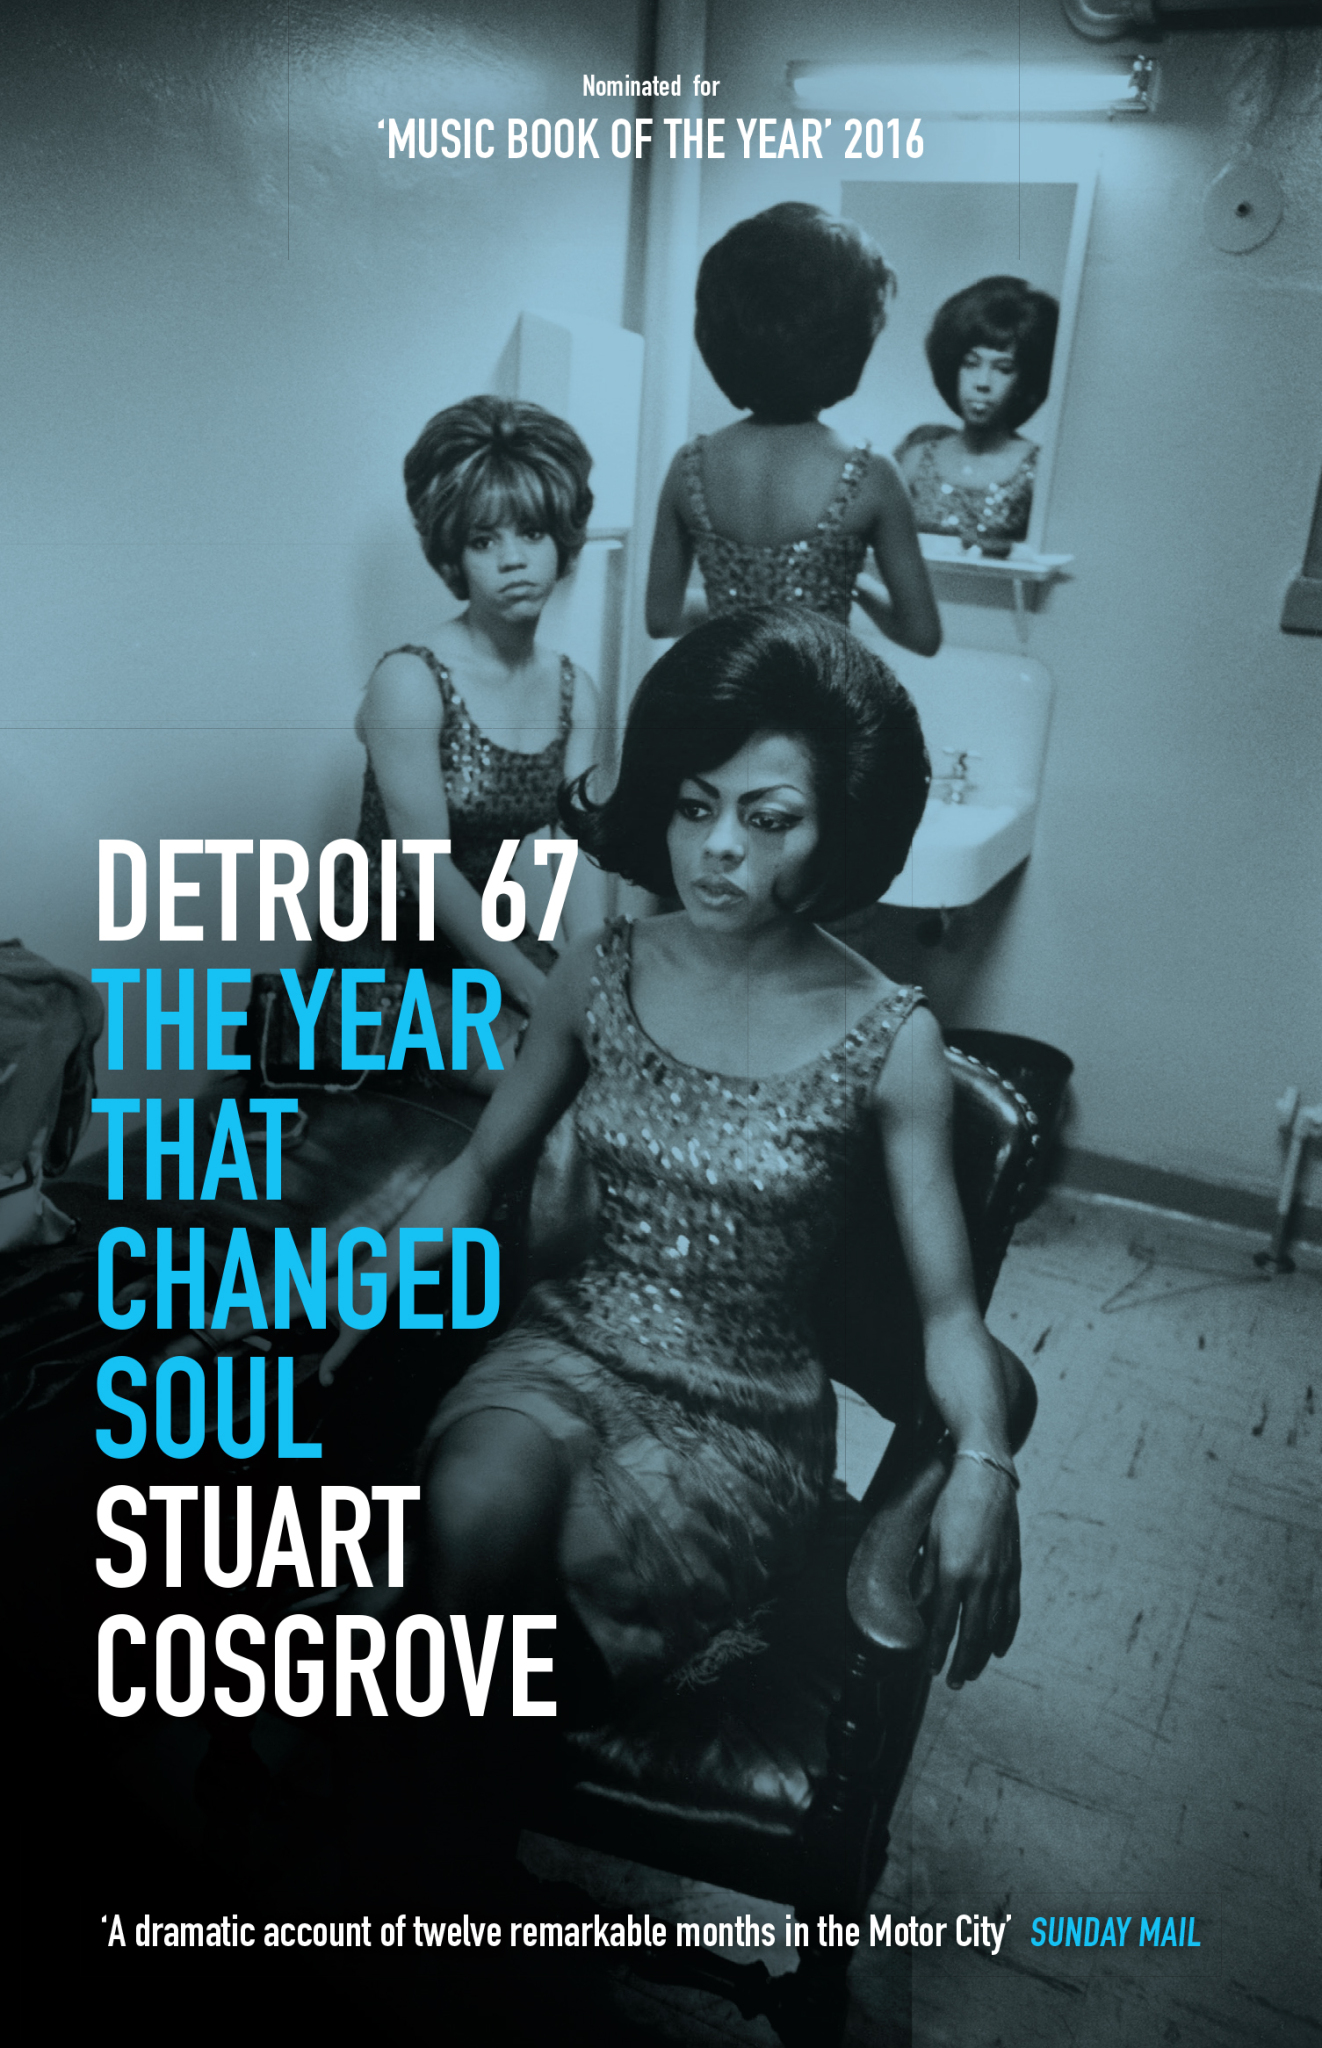 Detroit 67 is published by Polygon Books at £9.99